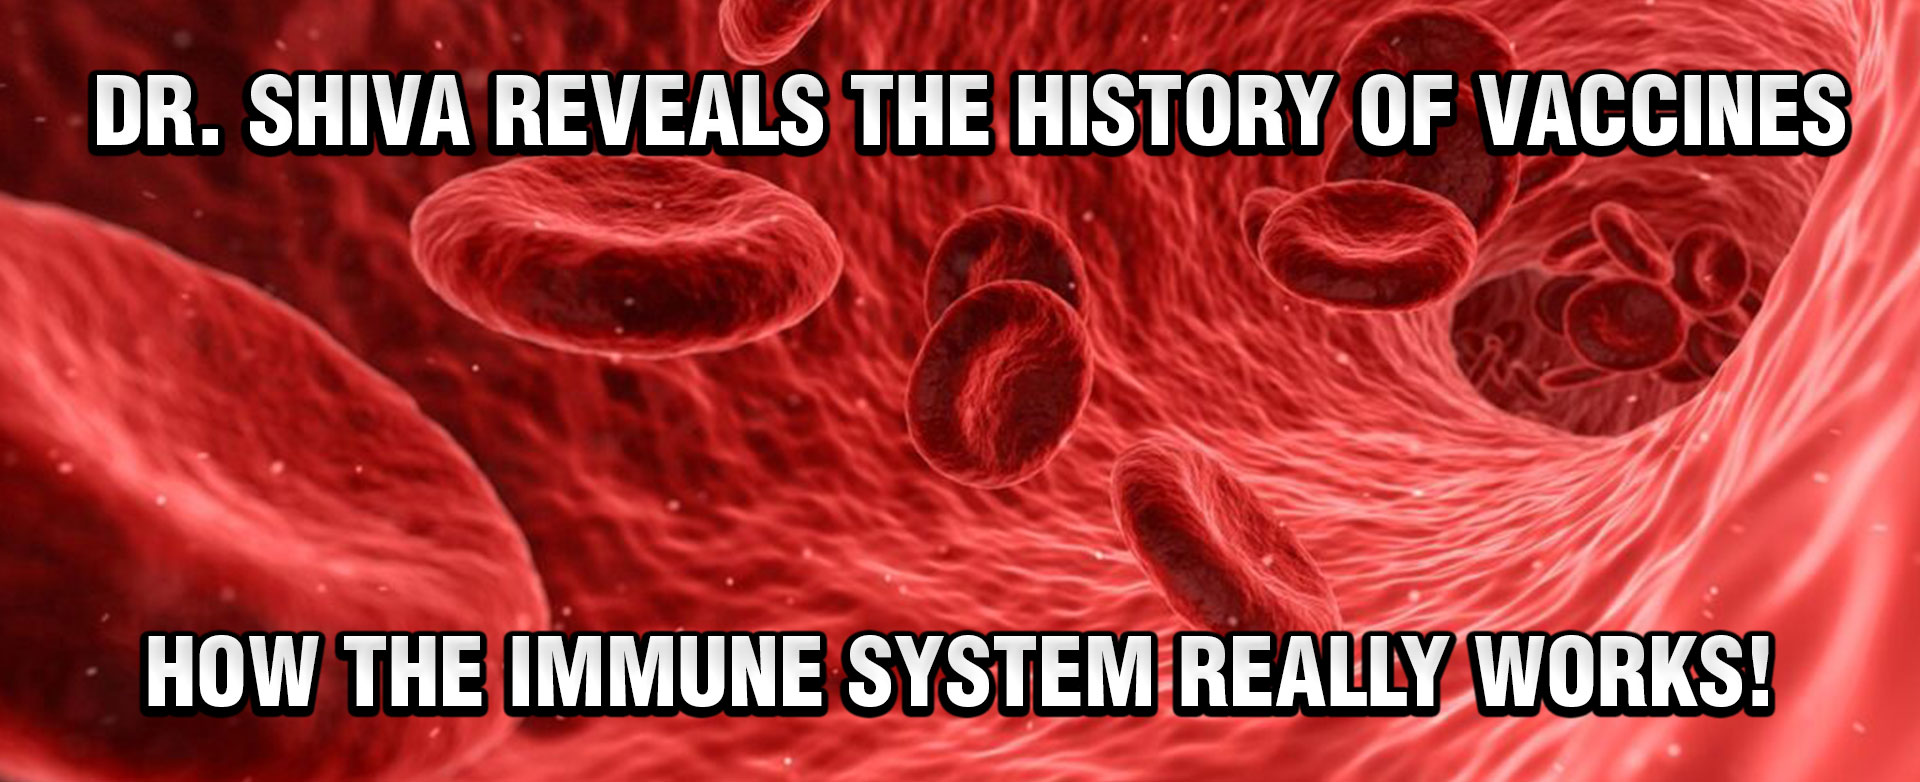 MyPatriotsNetwork-Dr. Shiva Reveals The History of Vaccines & How The Immune System REALLY Works!